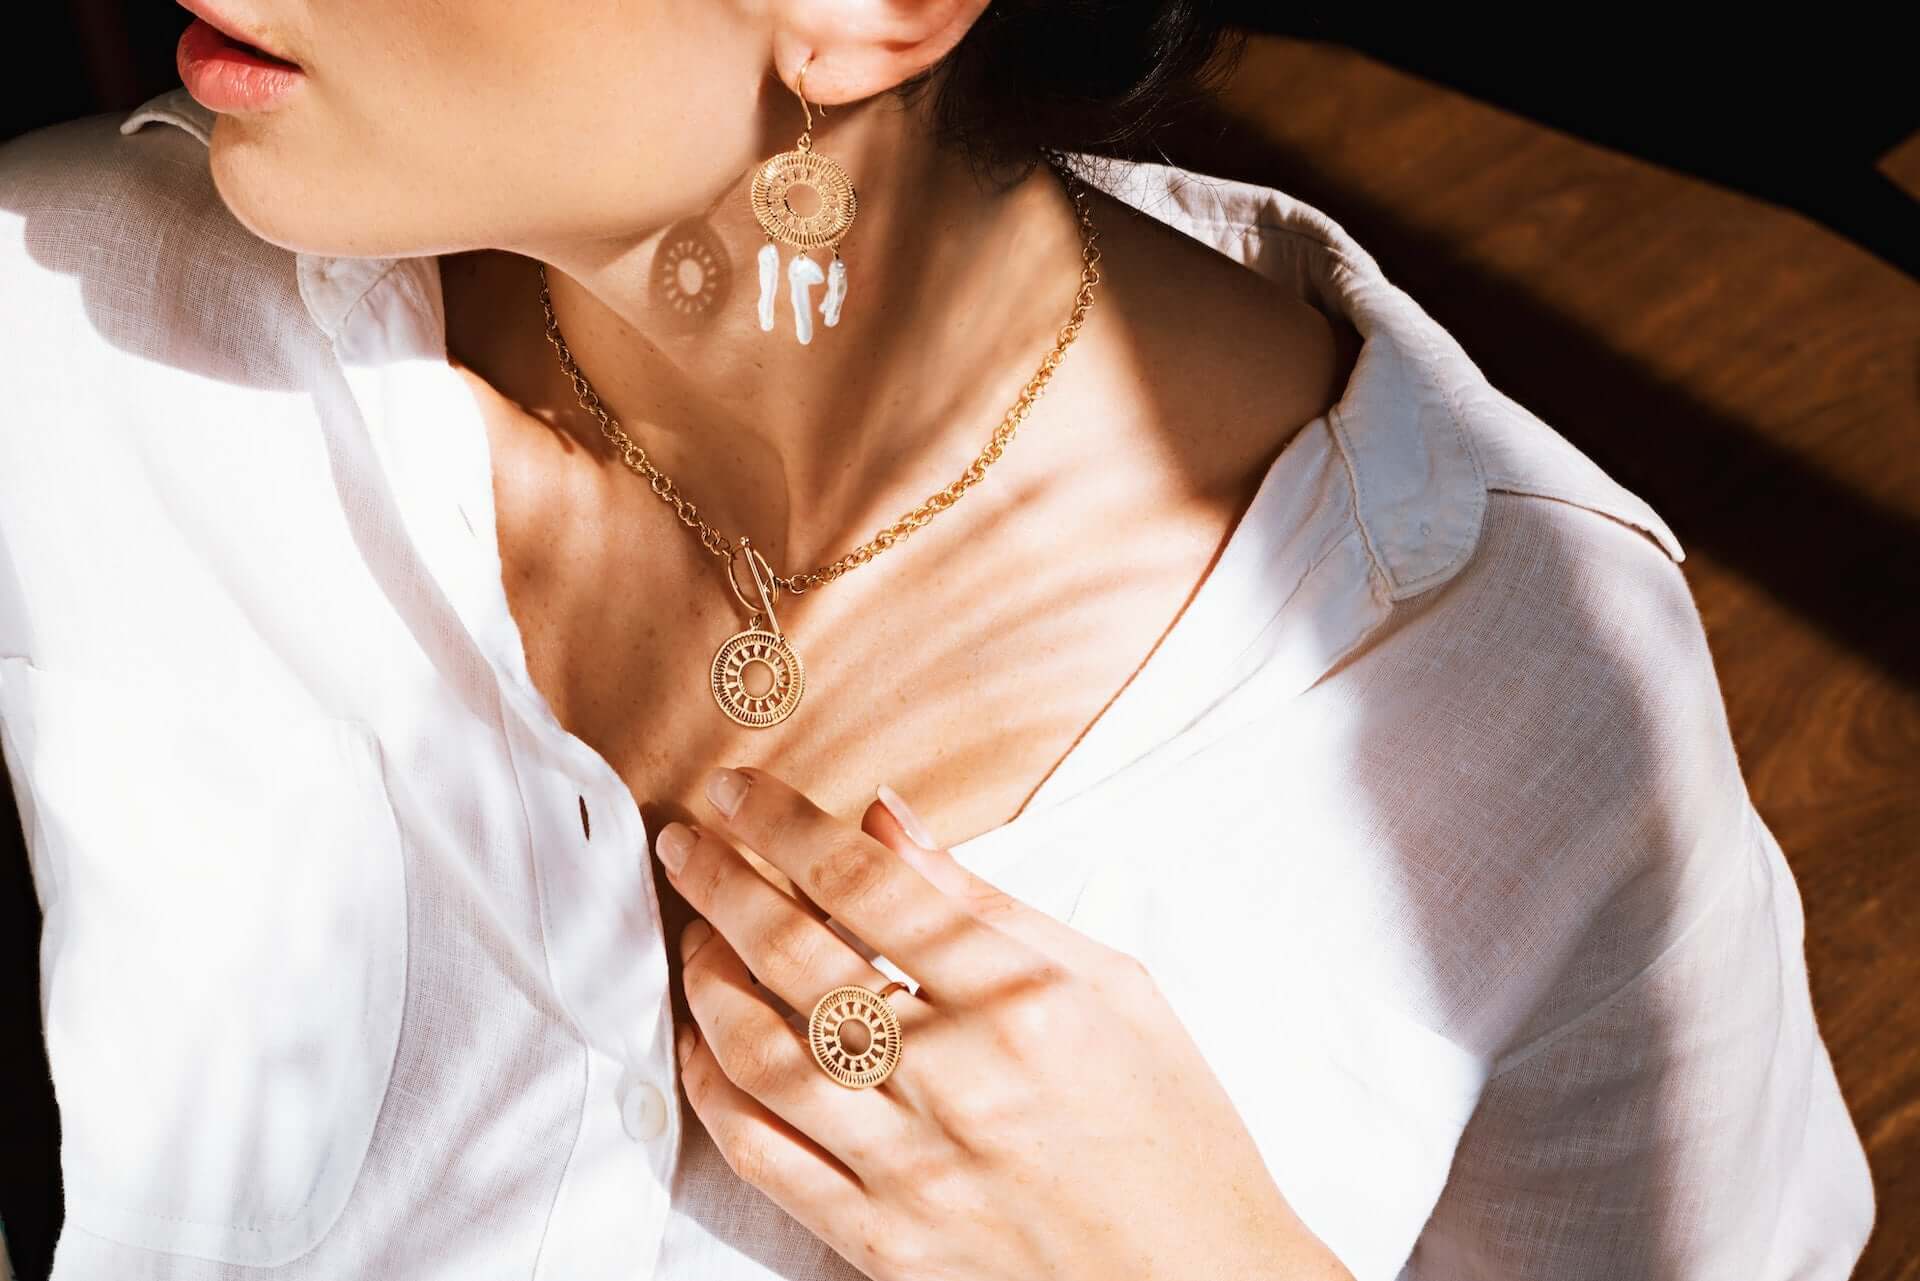 A woman in a white button down top wearing gold jewelry with white and clear stone accents.